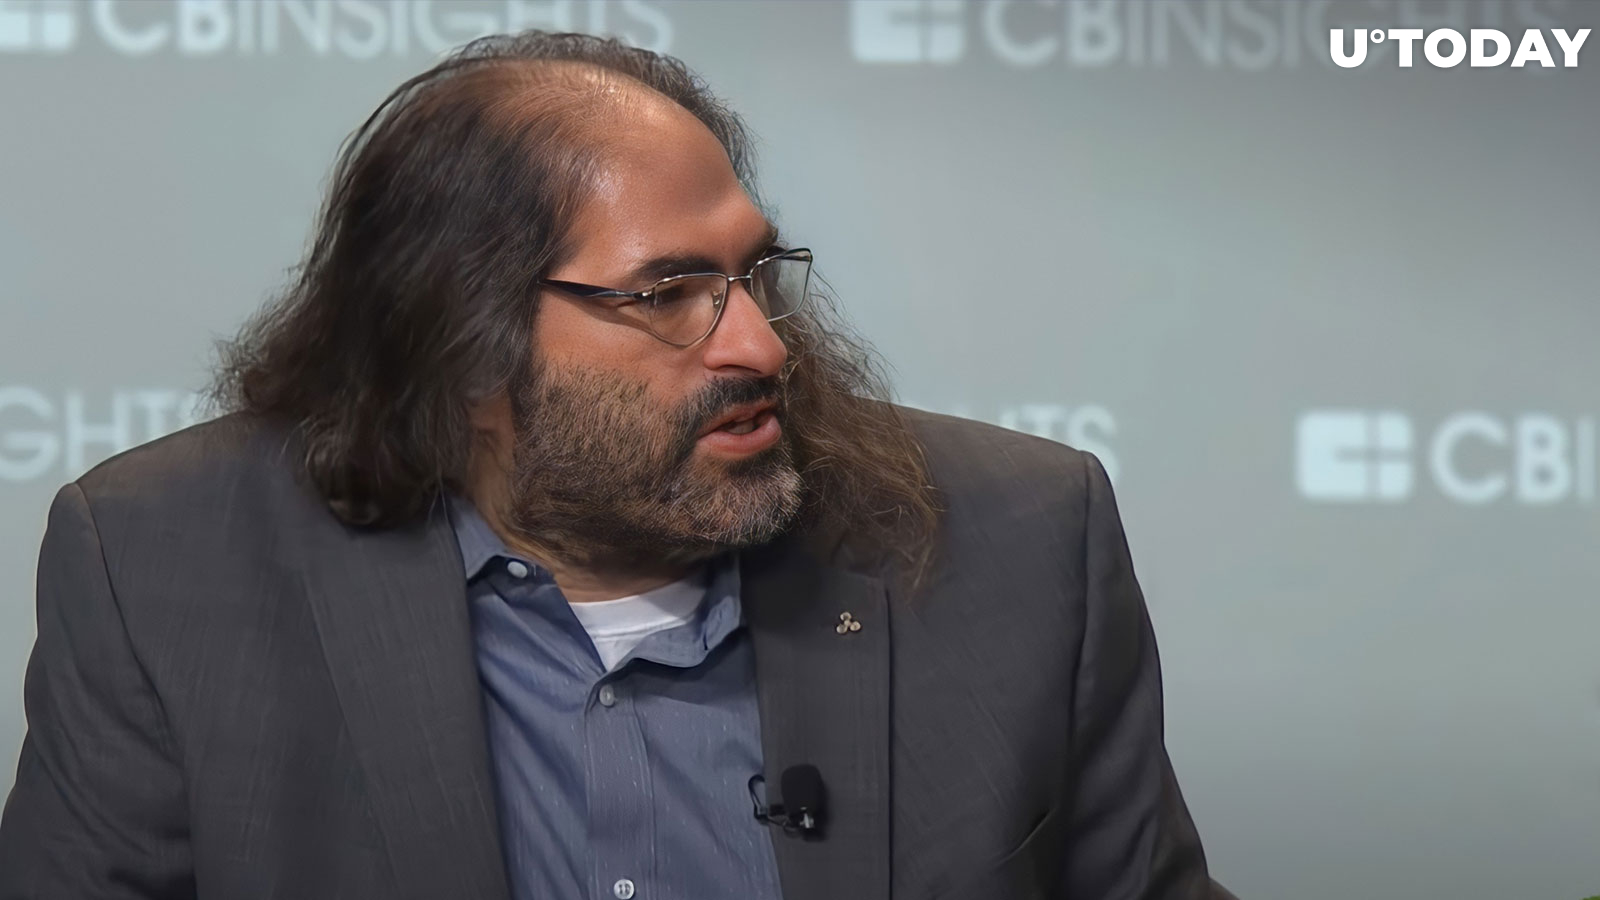 Ripple CTO Says Bitcoin Doesn't Deliver on Its Main Pitch